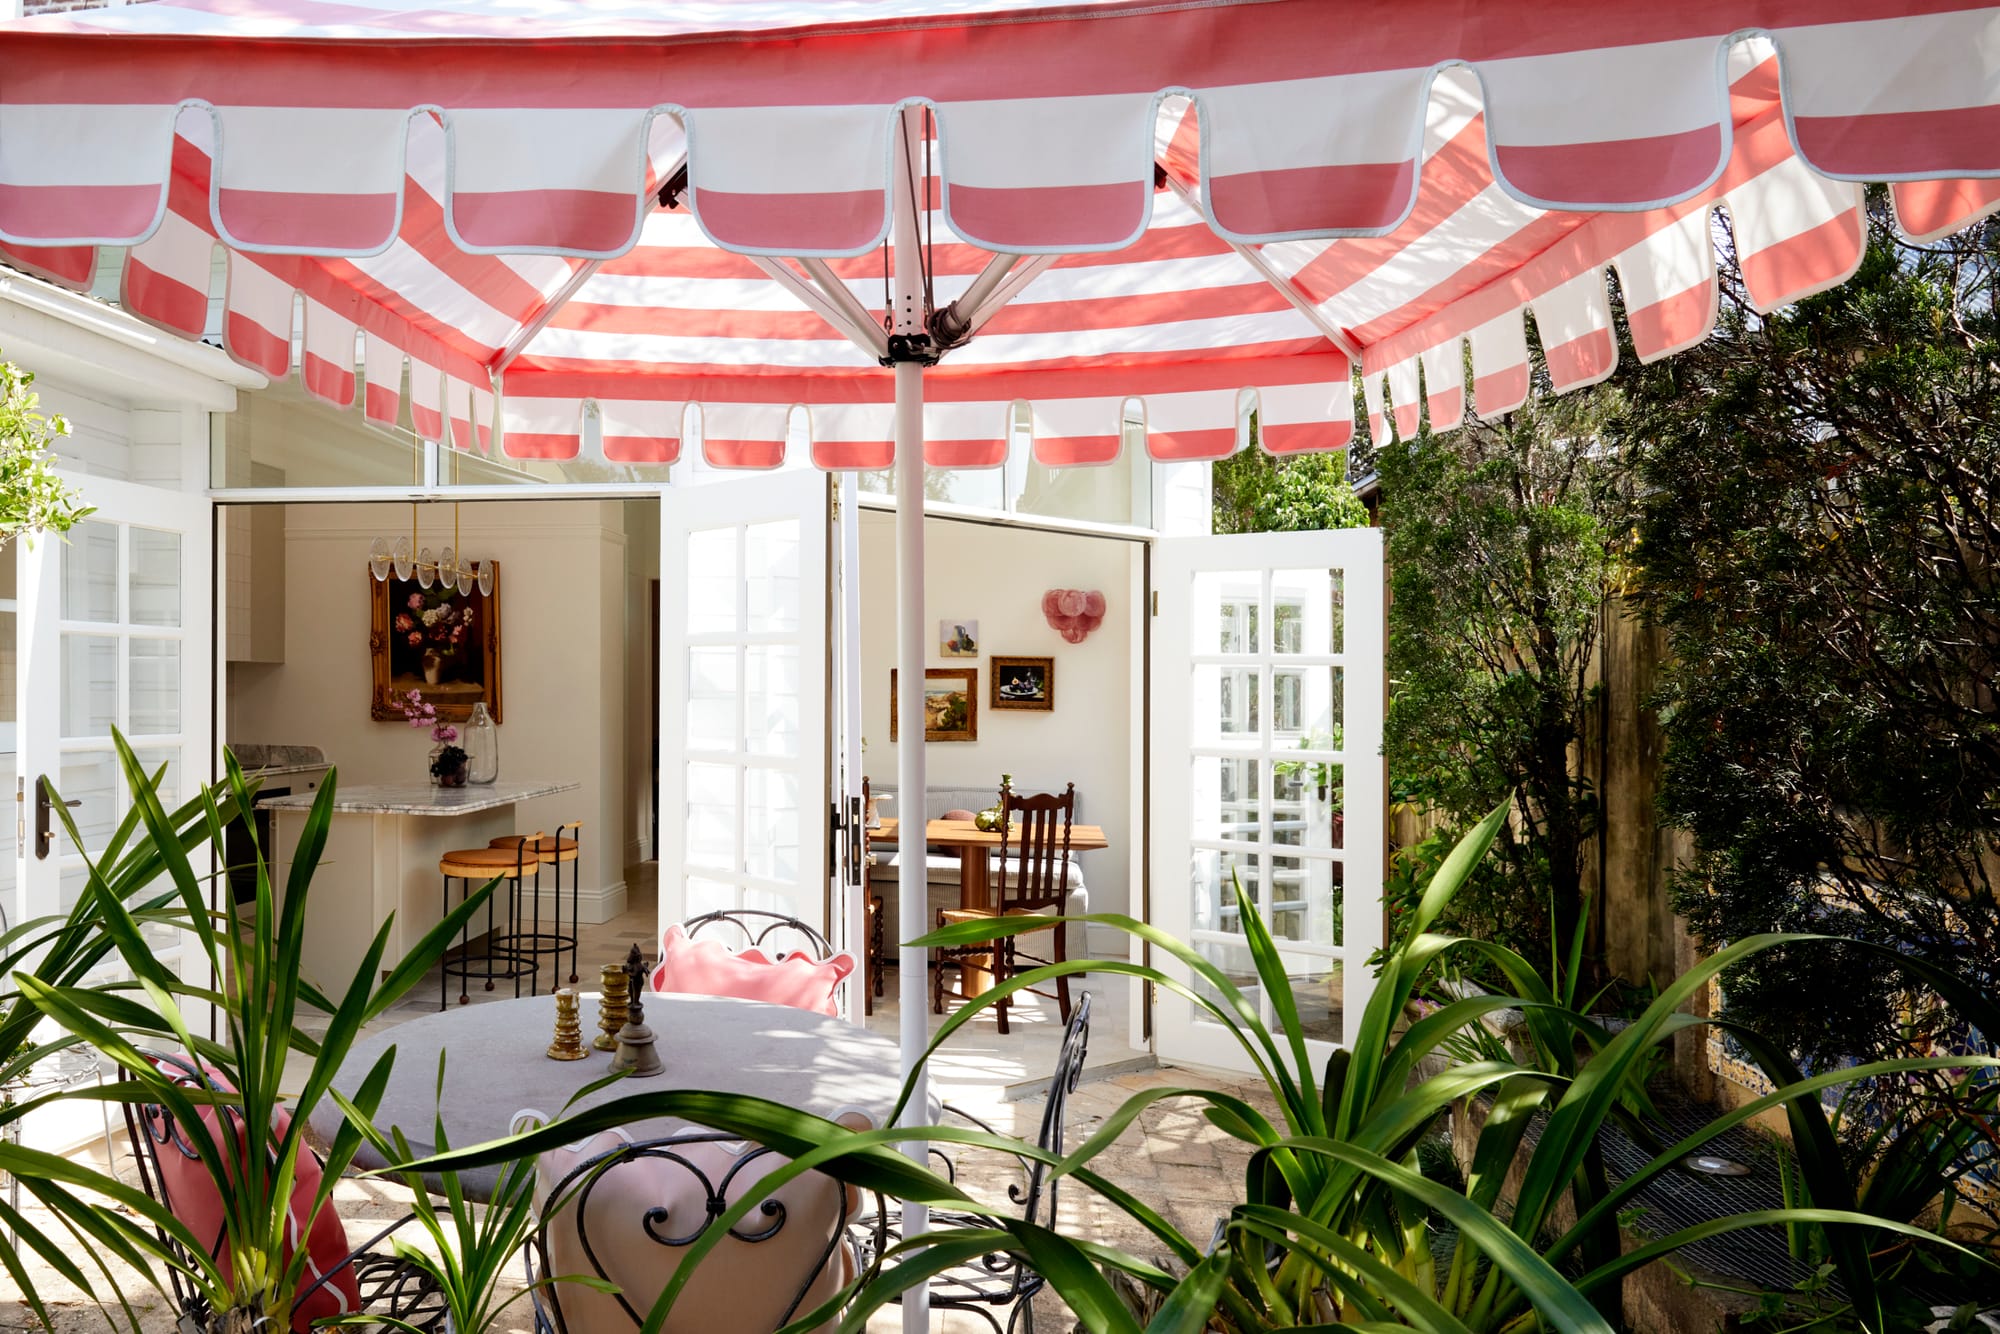 Drummoyne House by studio BARBARA. Photography by Jacqui Turk. Garden terrace with large pink and white umbrella over outdoor wrought iron dining setting. Lush gardens. French doors open onto indoor dining space and kitchen.